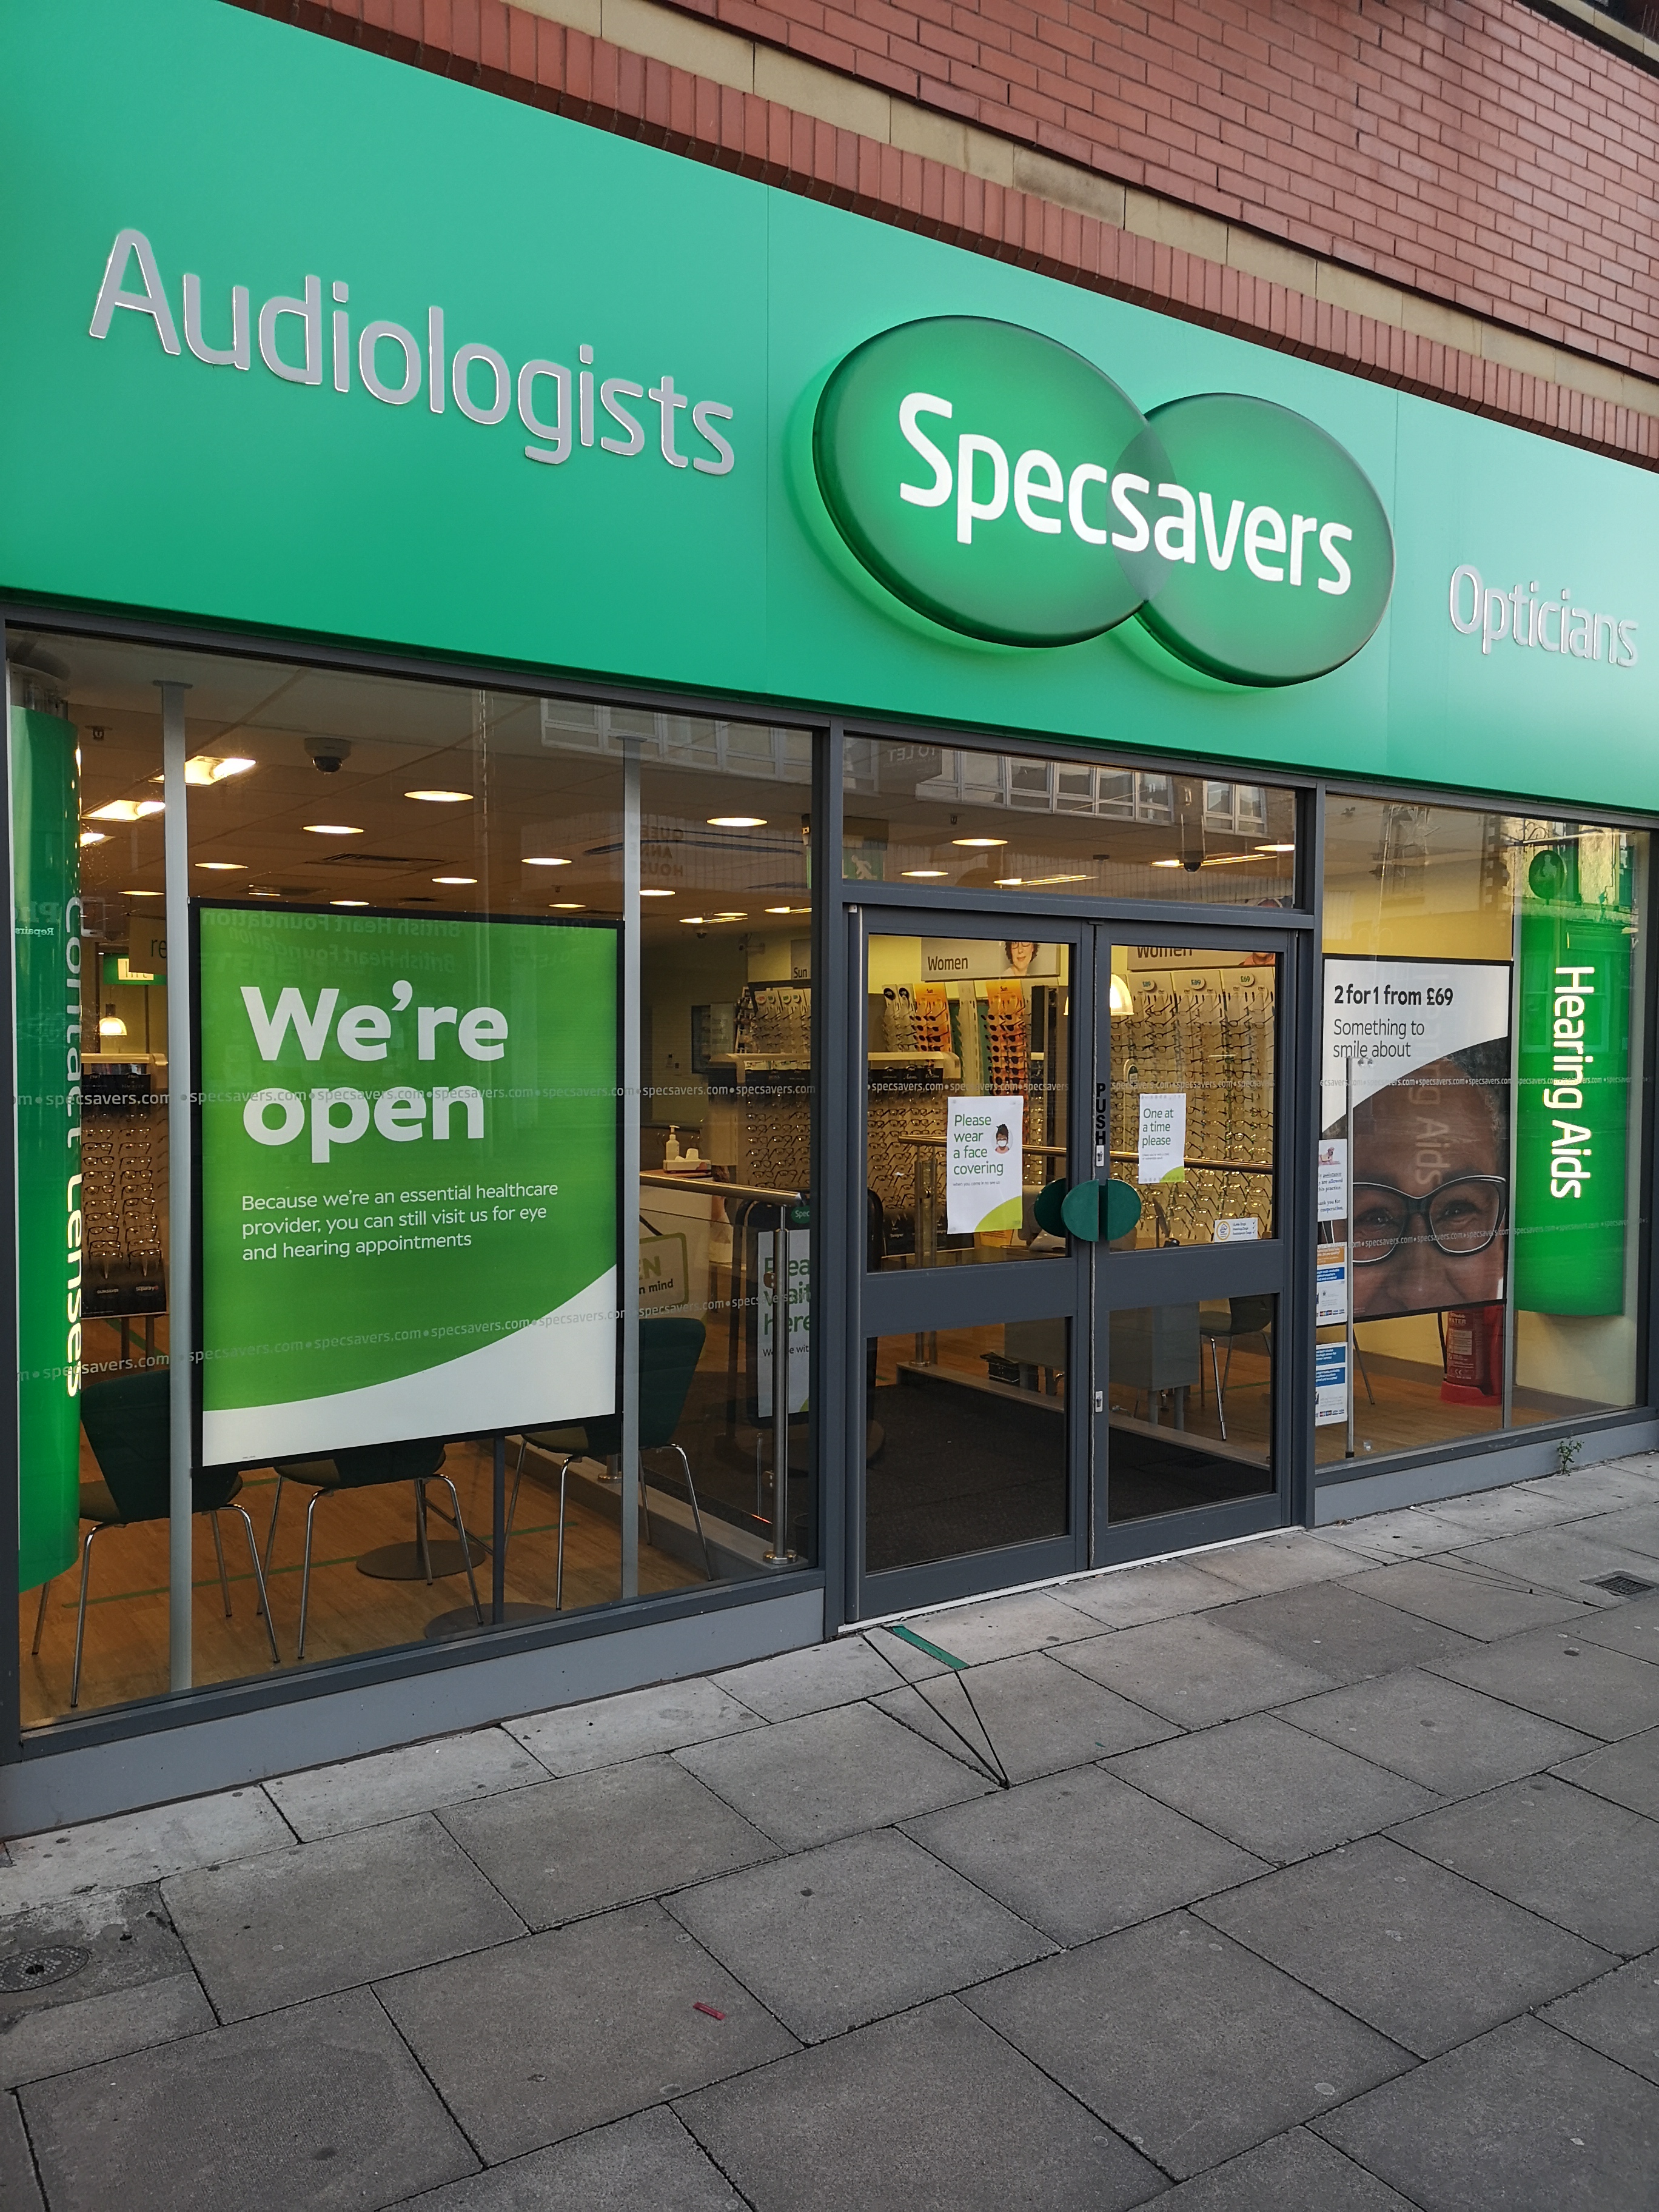 Specsavers Southport storefront Specsavers Opticians and Audiologists - Southport Southport 01704 501944